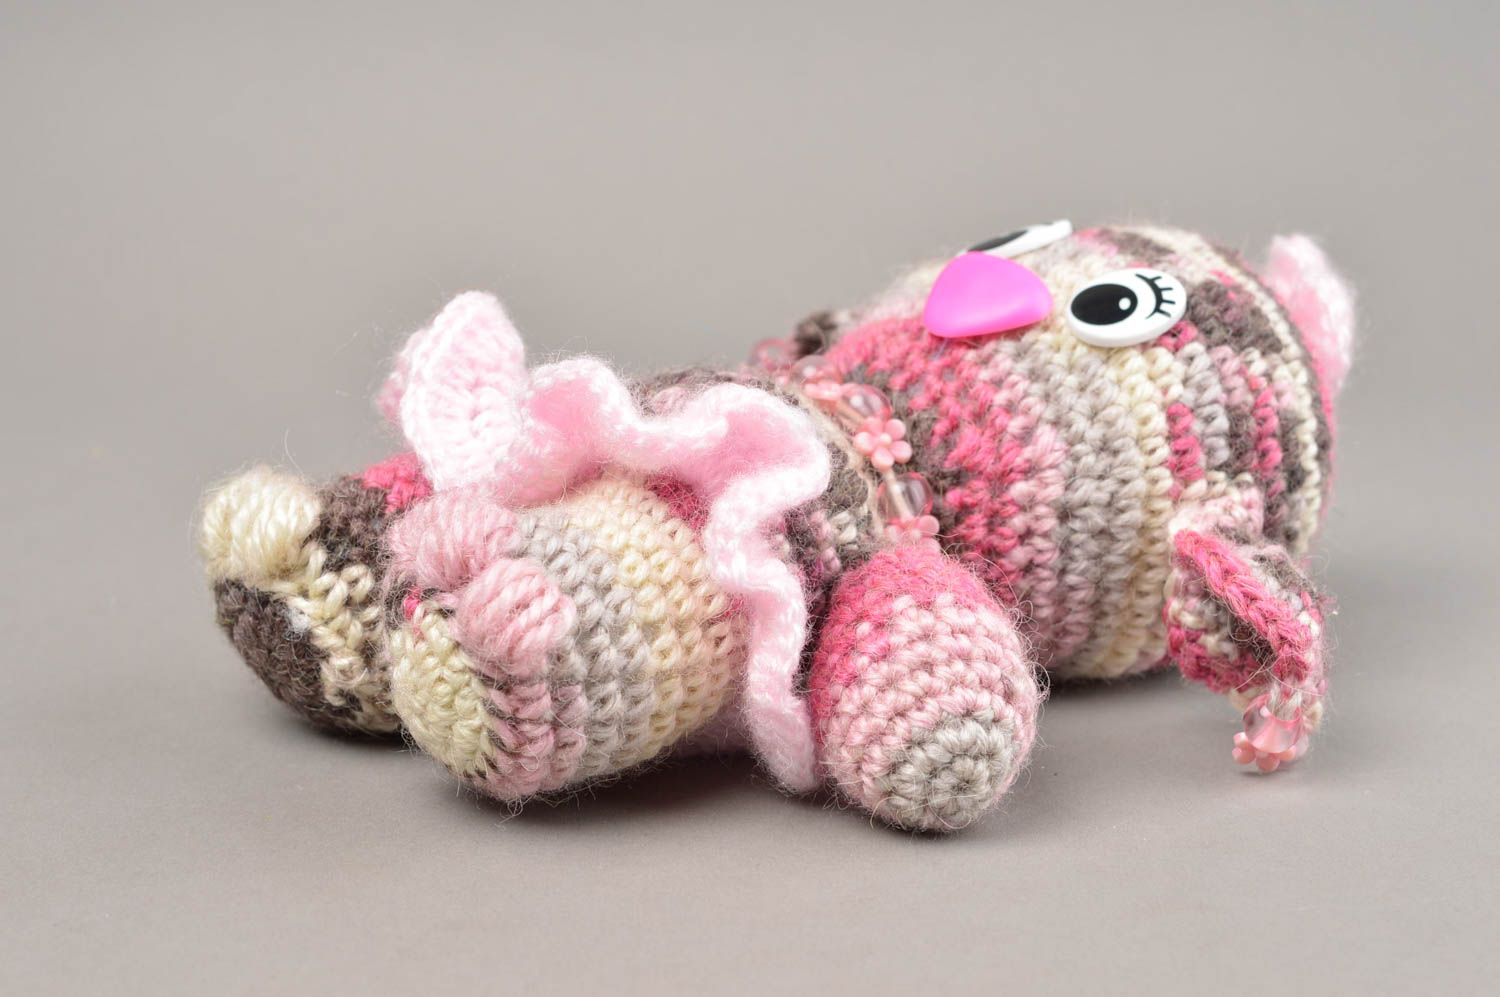 Handmade pink soft toy crocheted beautiful souvenir unusual present for kids photo 4